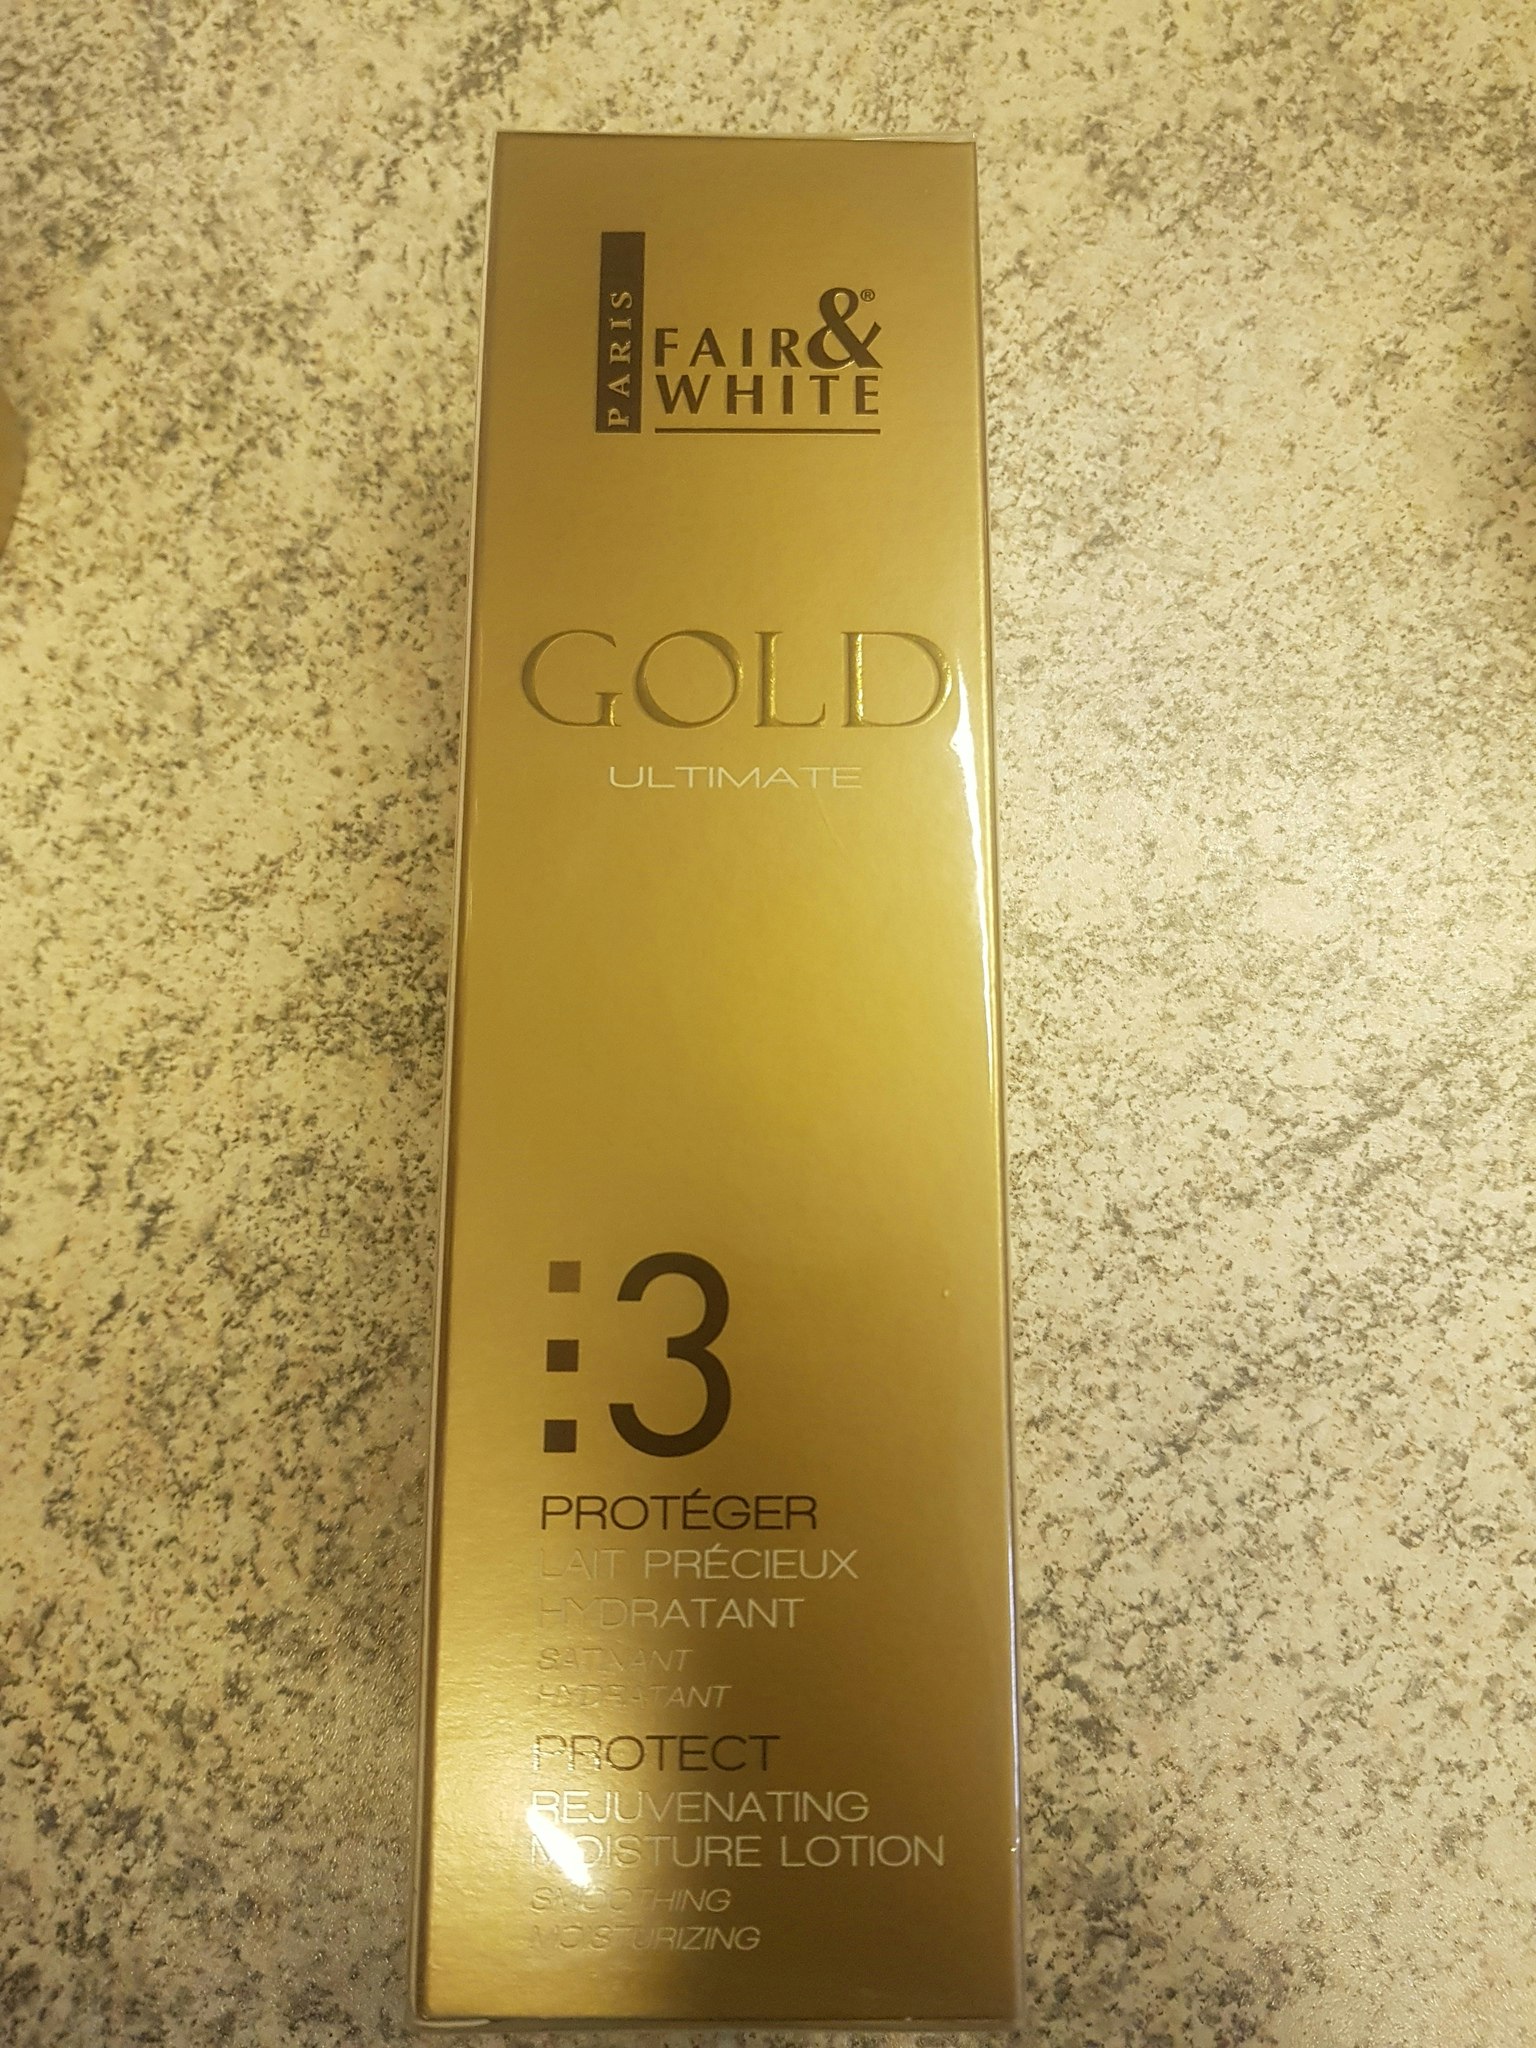 Fair & White Gold ultimate GOLD